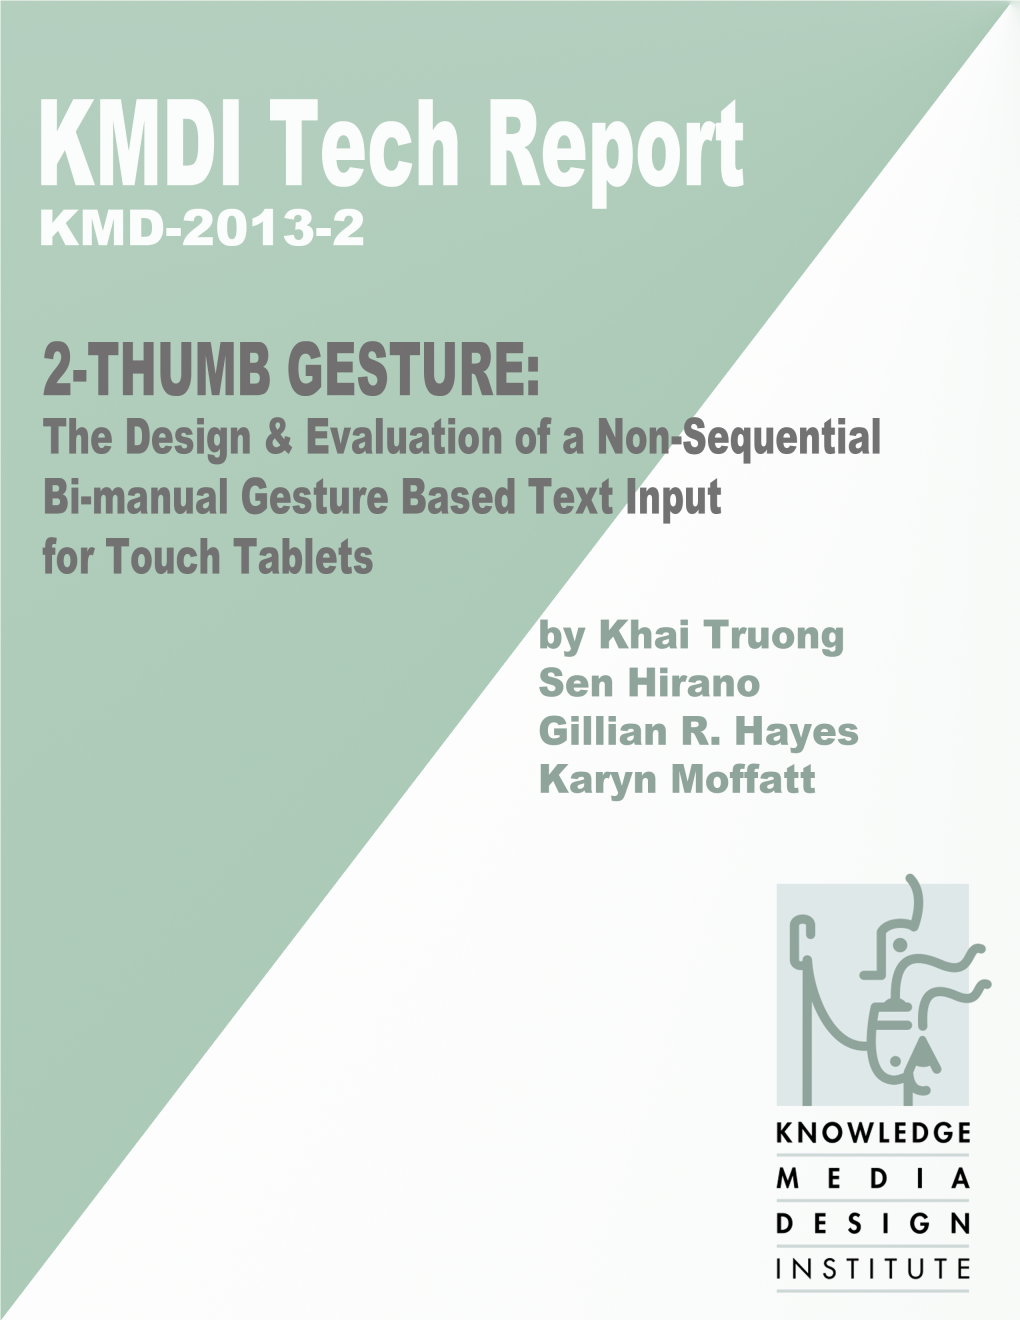 2-Thumbs Gesture: the Design and Evaluation of a Non-Sequential Bi